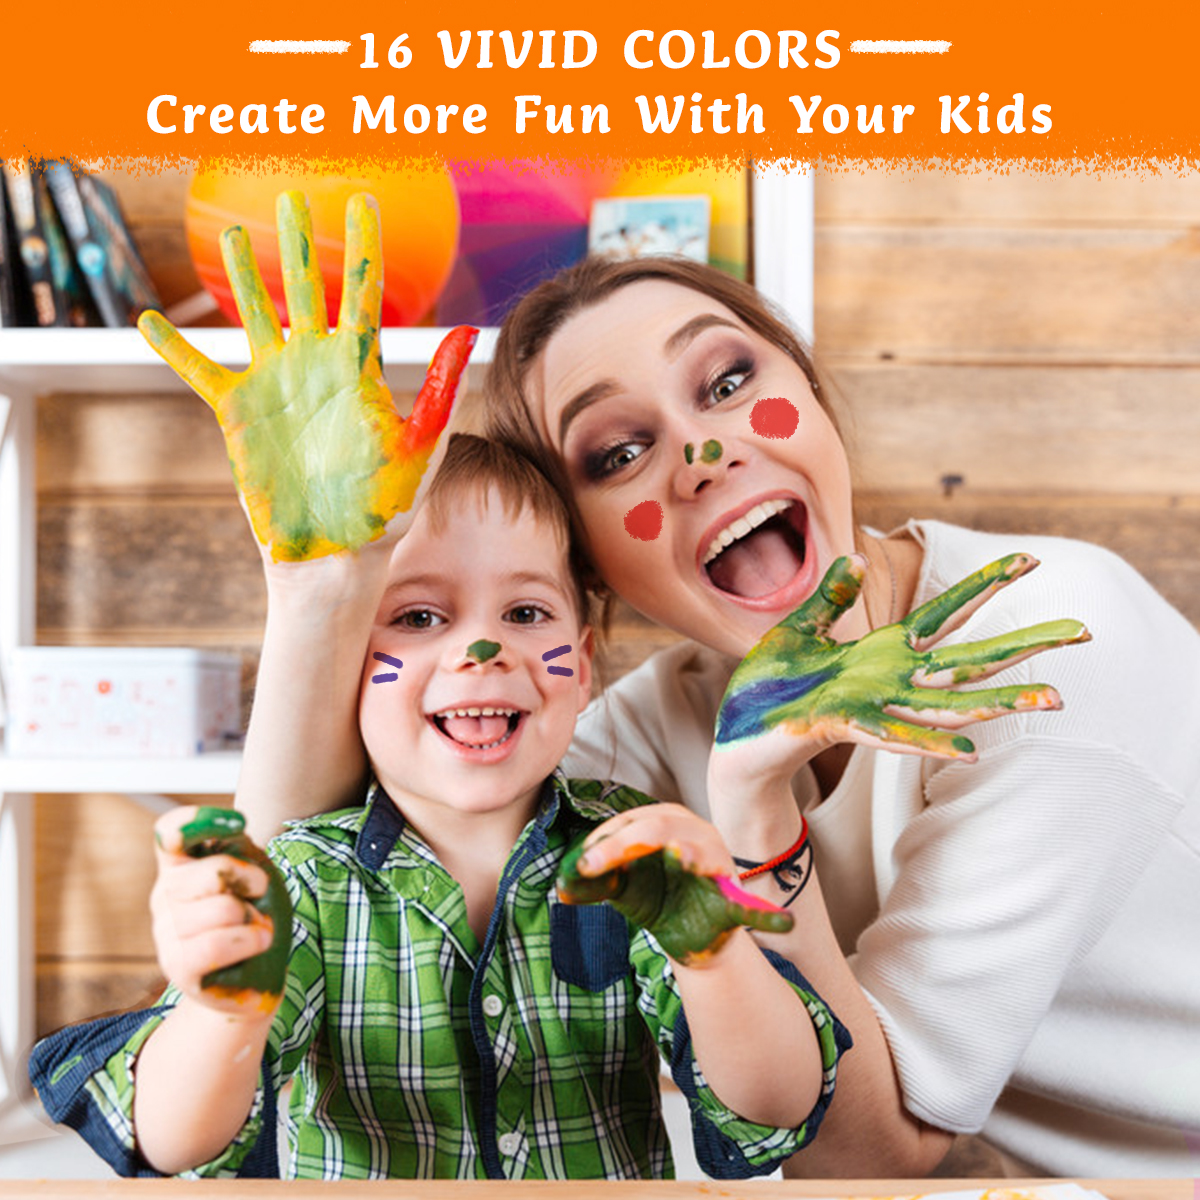 Paint-Crayons-Kit-Luckyfine-Face--Body-Paint-Crayons-Set-for-Kids-Safe-Non-Toxic-and-Non-irritating--1900414-6